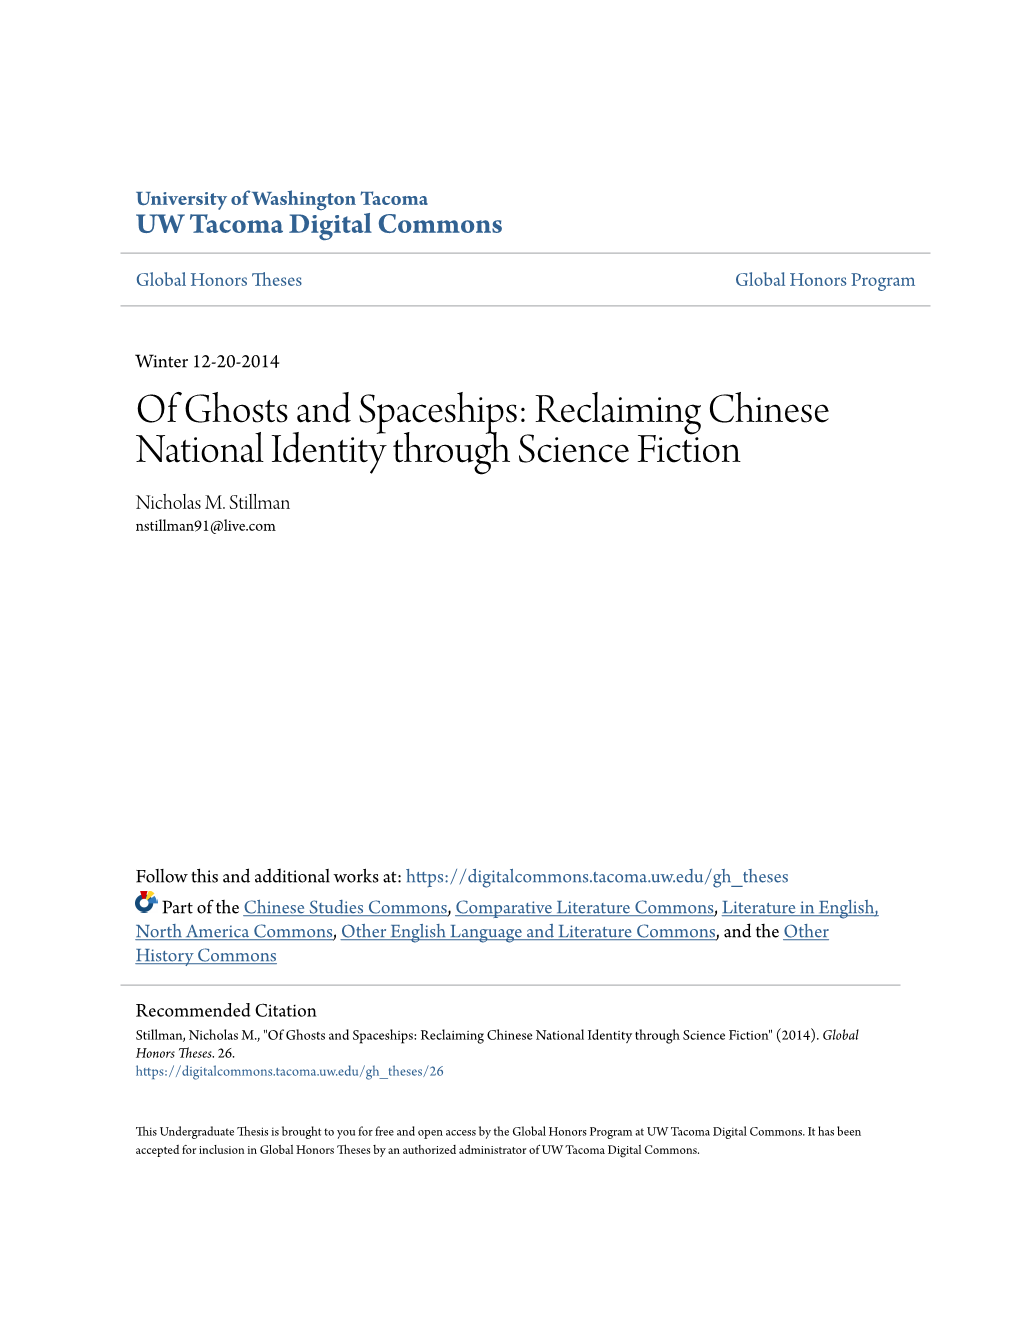 Of Ghosts and Spaceships: Reclaiming Chinese National Identity Through Science Fiction Nicholas M